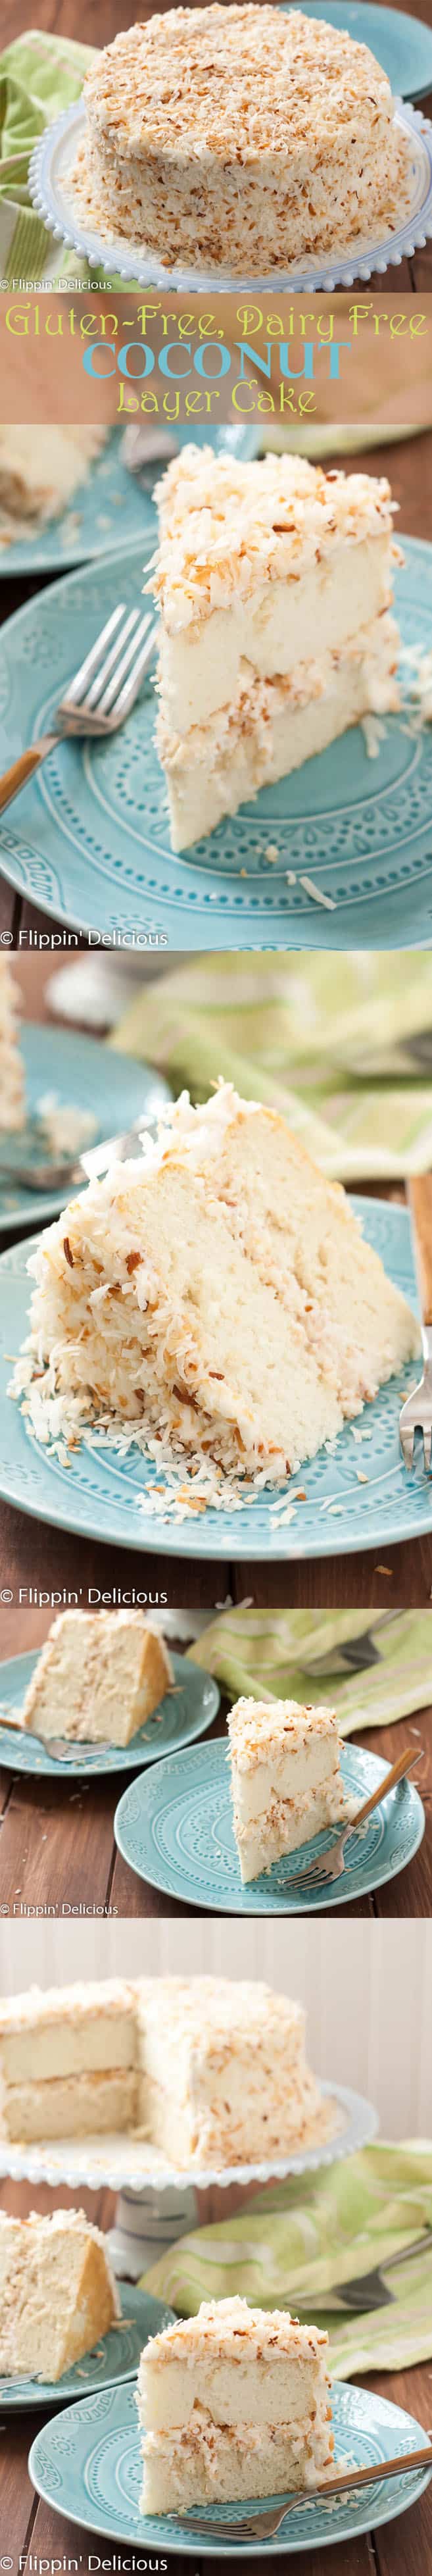 This Dairy Free Gluten Free Coconut Layer Cake is a stunning spring dessert. The toasted coconut sprinkled all over the silky dairy free coconut buttercream hides any imperfections making this is an easy, show-stopping dessert for Easter.